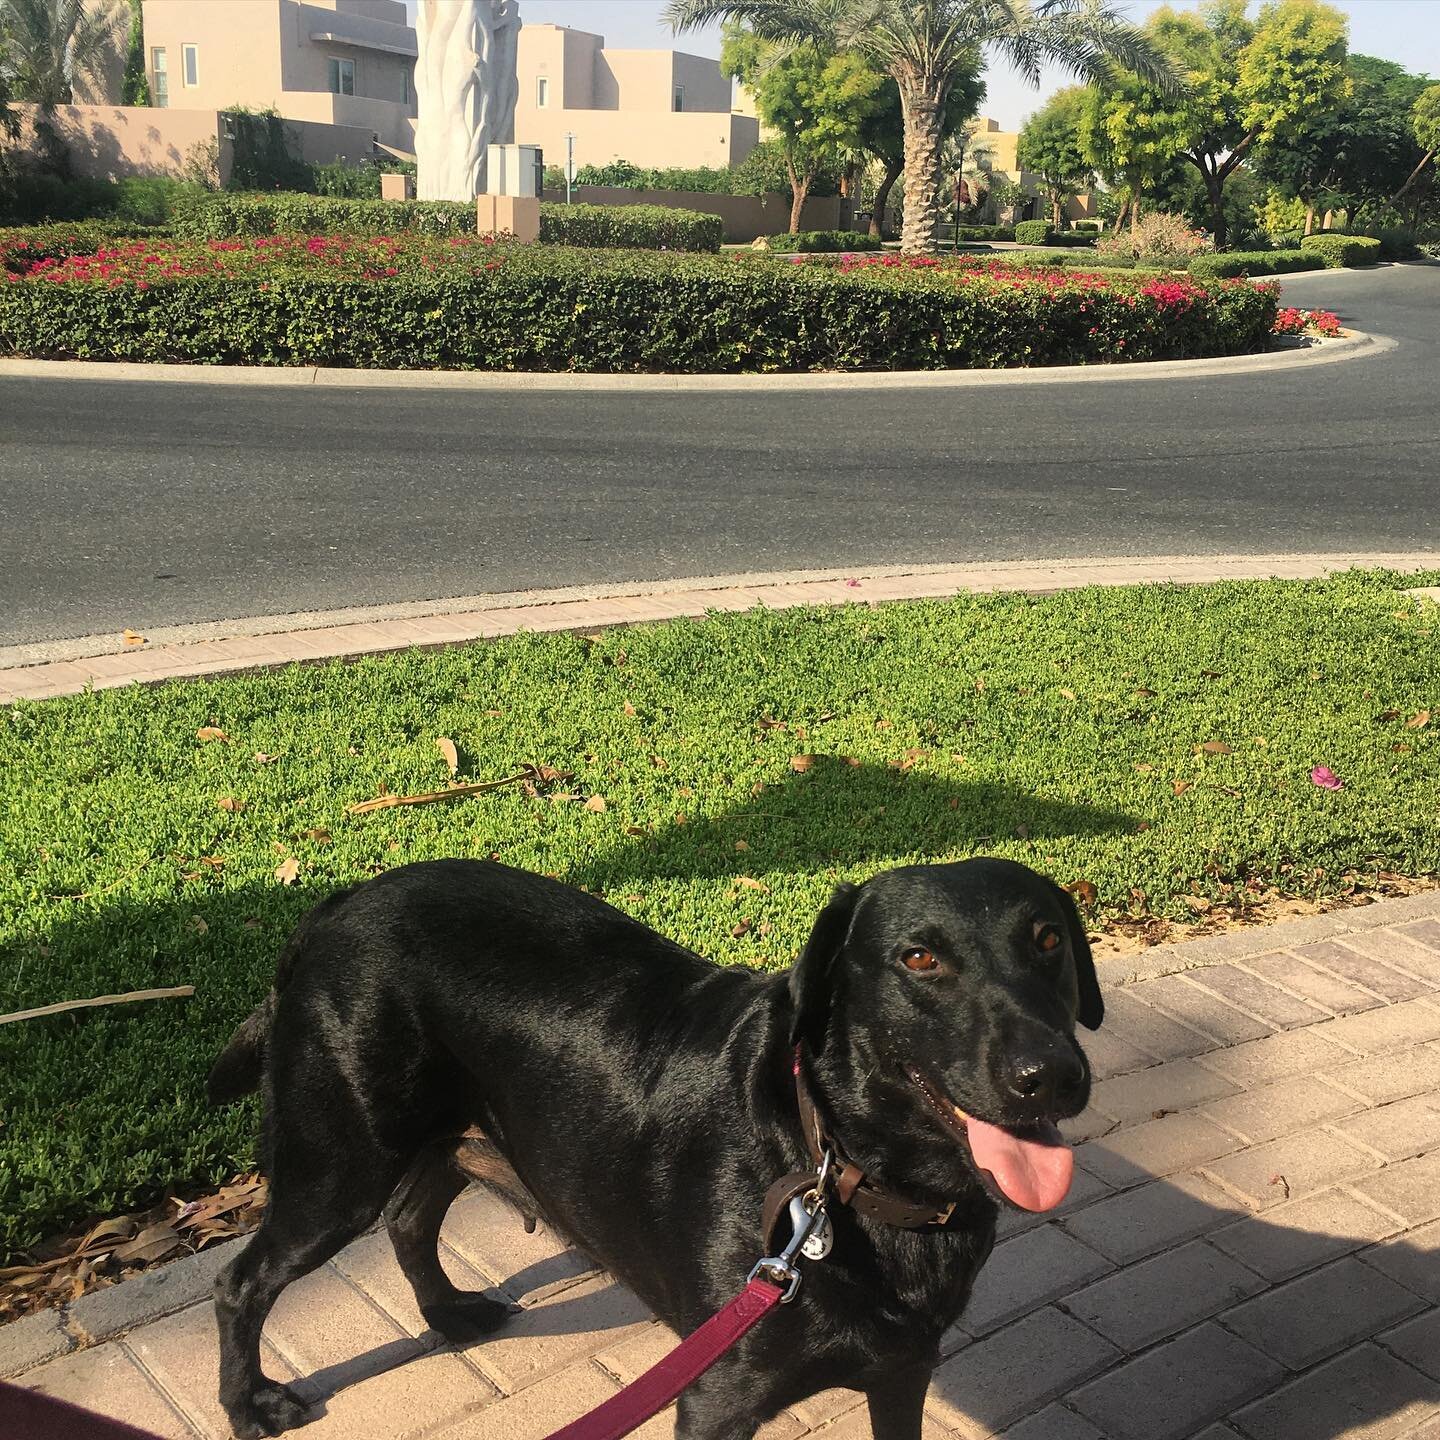 Twice daily walks with Abee. We stick to the shade as much as we can... even if it&rsquo;s up and down the same street. Don&rsquo;t wanna burn those pawsies 🖤 #dogwalker #dubaidogs #dubaidog #dogsindubai #blacklab #blacklabrador